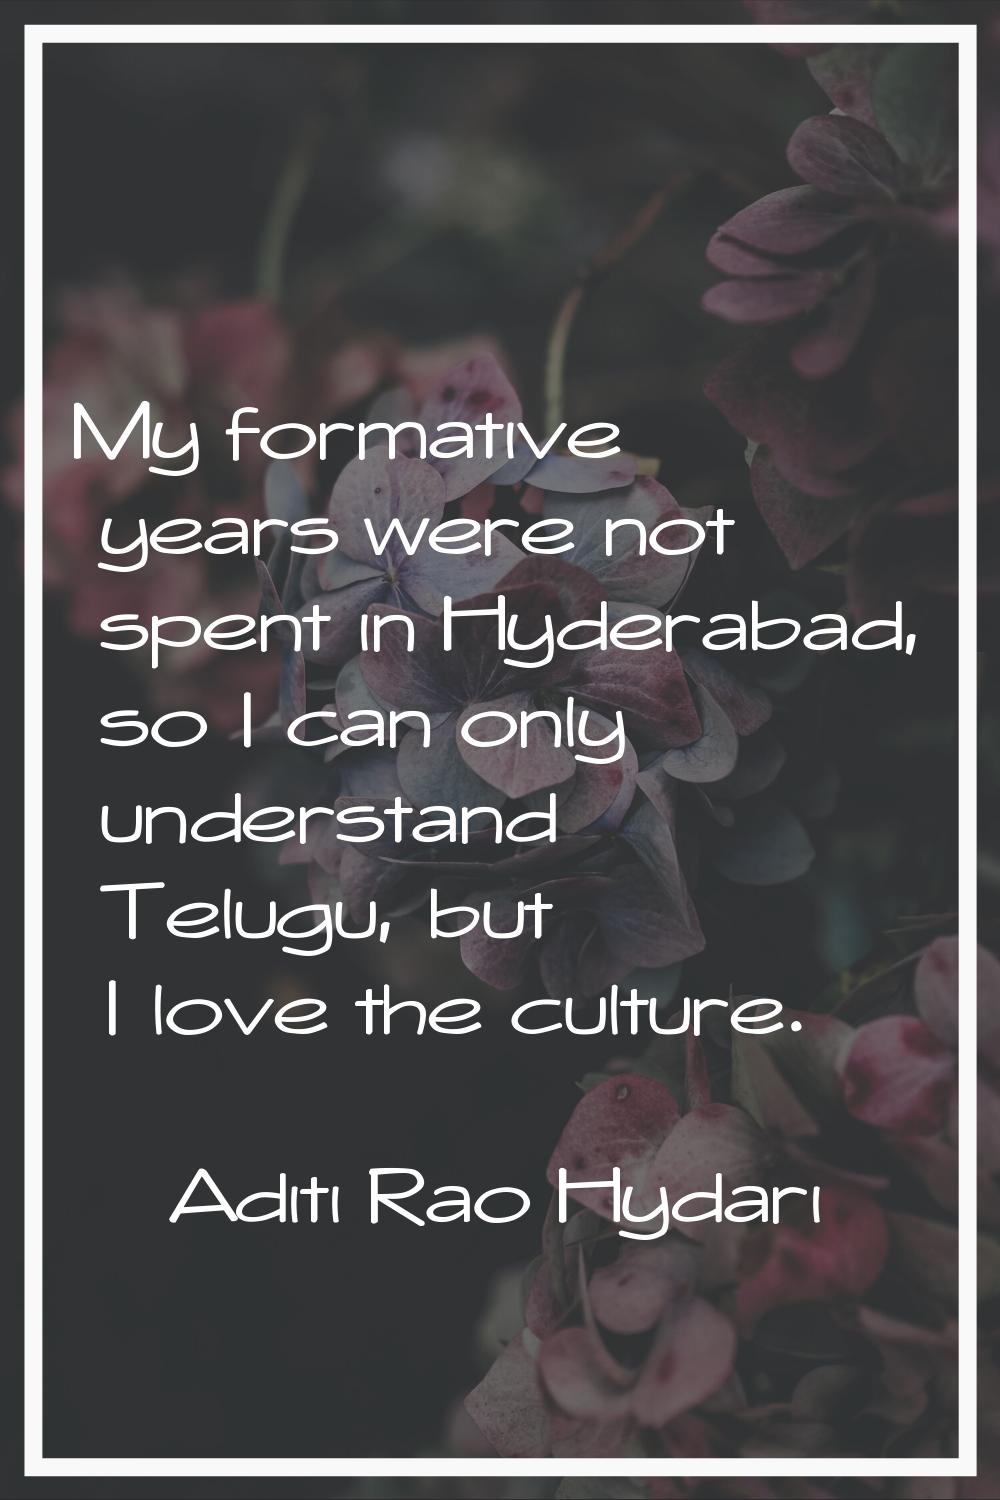 My formative years were not spent in Hyderabad, so I can only understand Telugu, but I love the cul